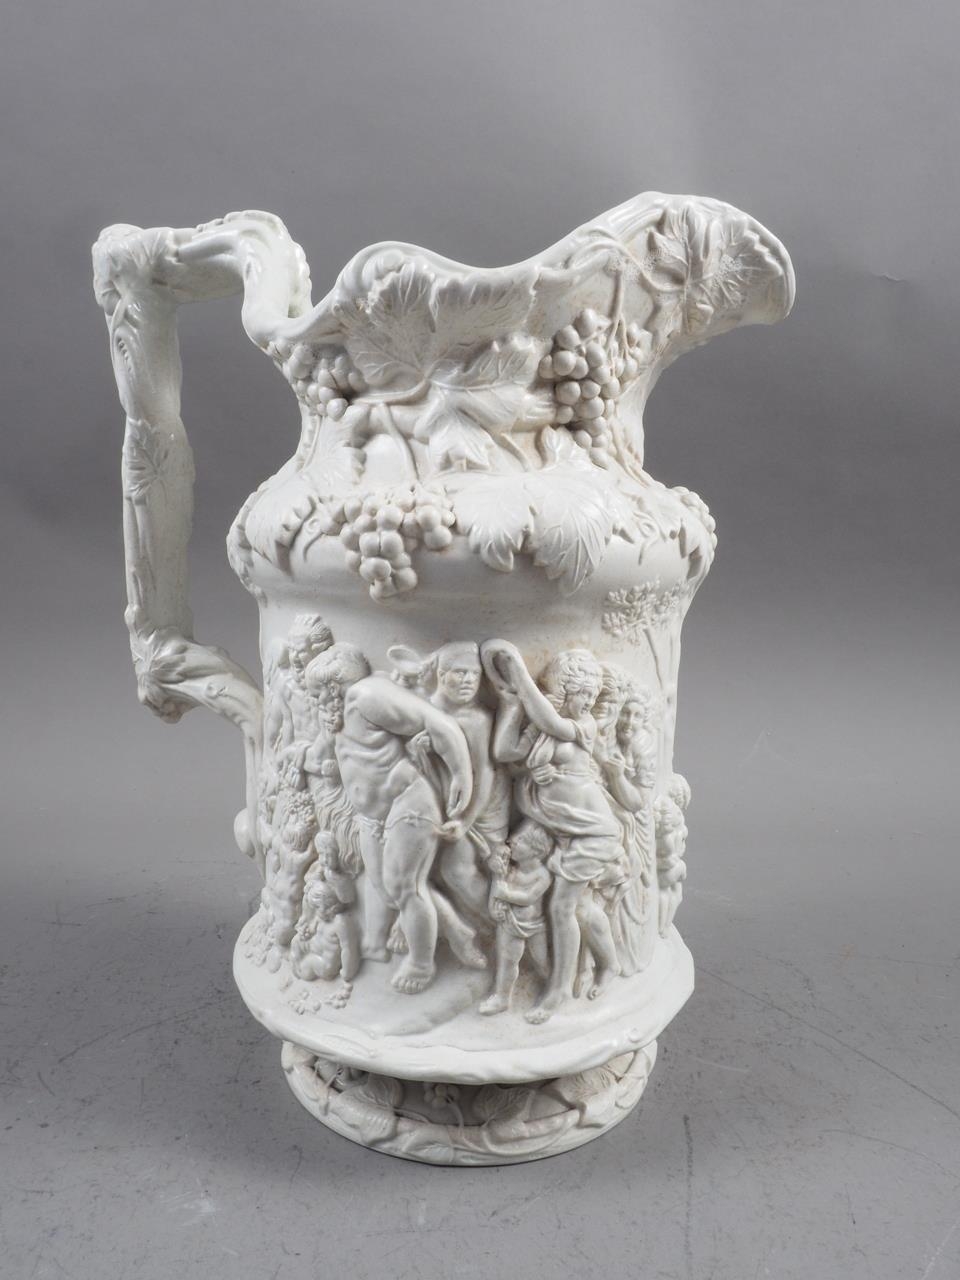 A Charles Meigh 19th century relief moulded jug with Bacchus and Silenus decoration, 10 1/4" high, a